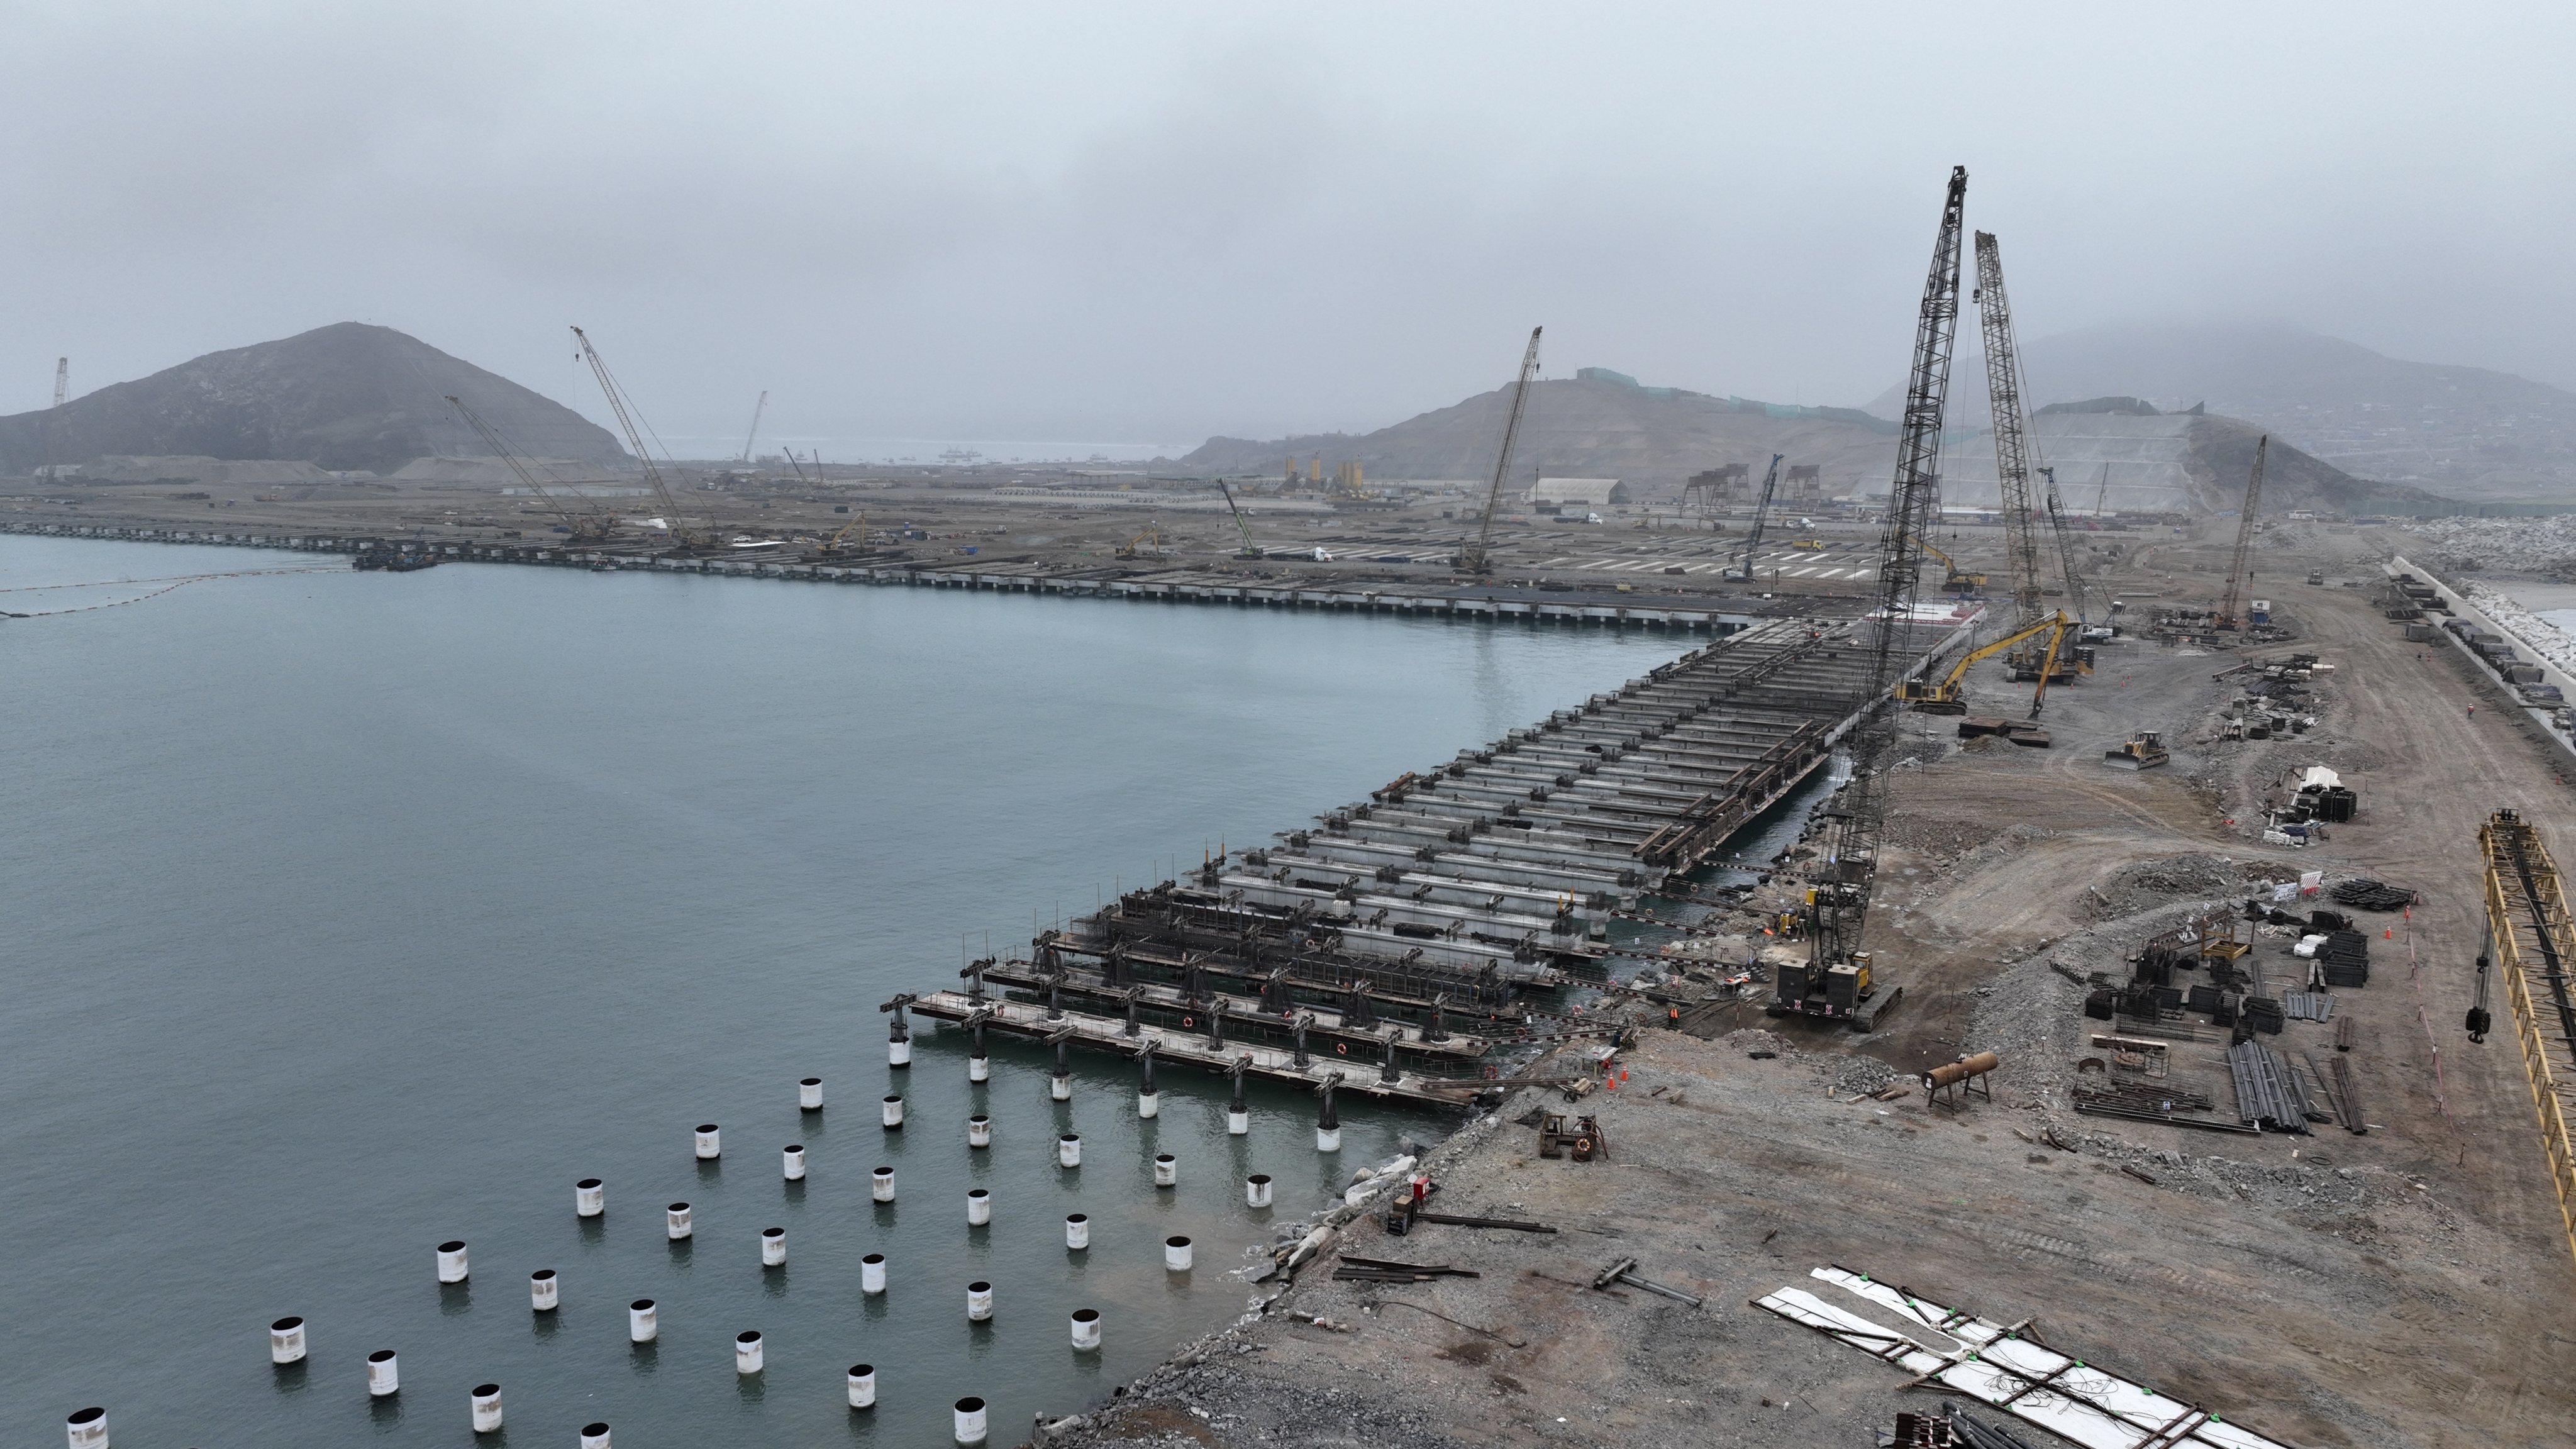 China’s ambitious port project in Peru is aimed at spurring trade between South America and the Asian economic giant. Photo: AP